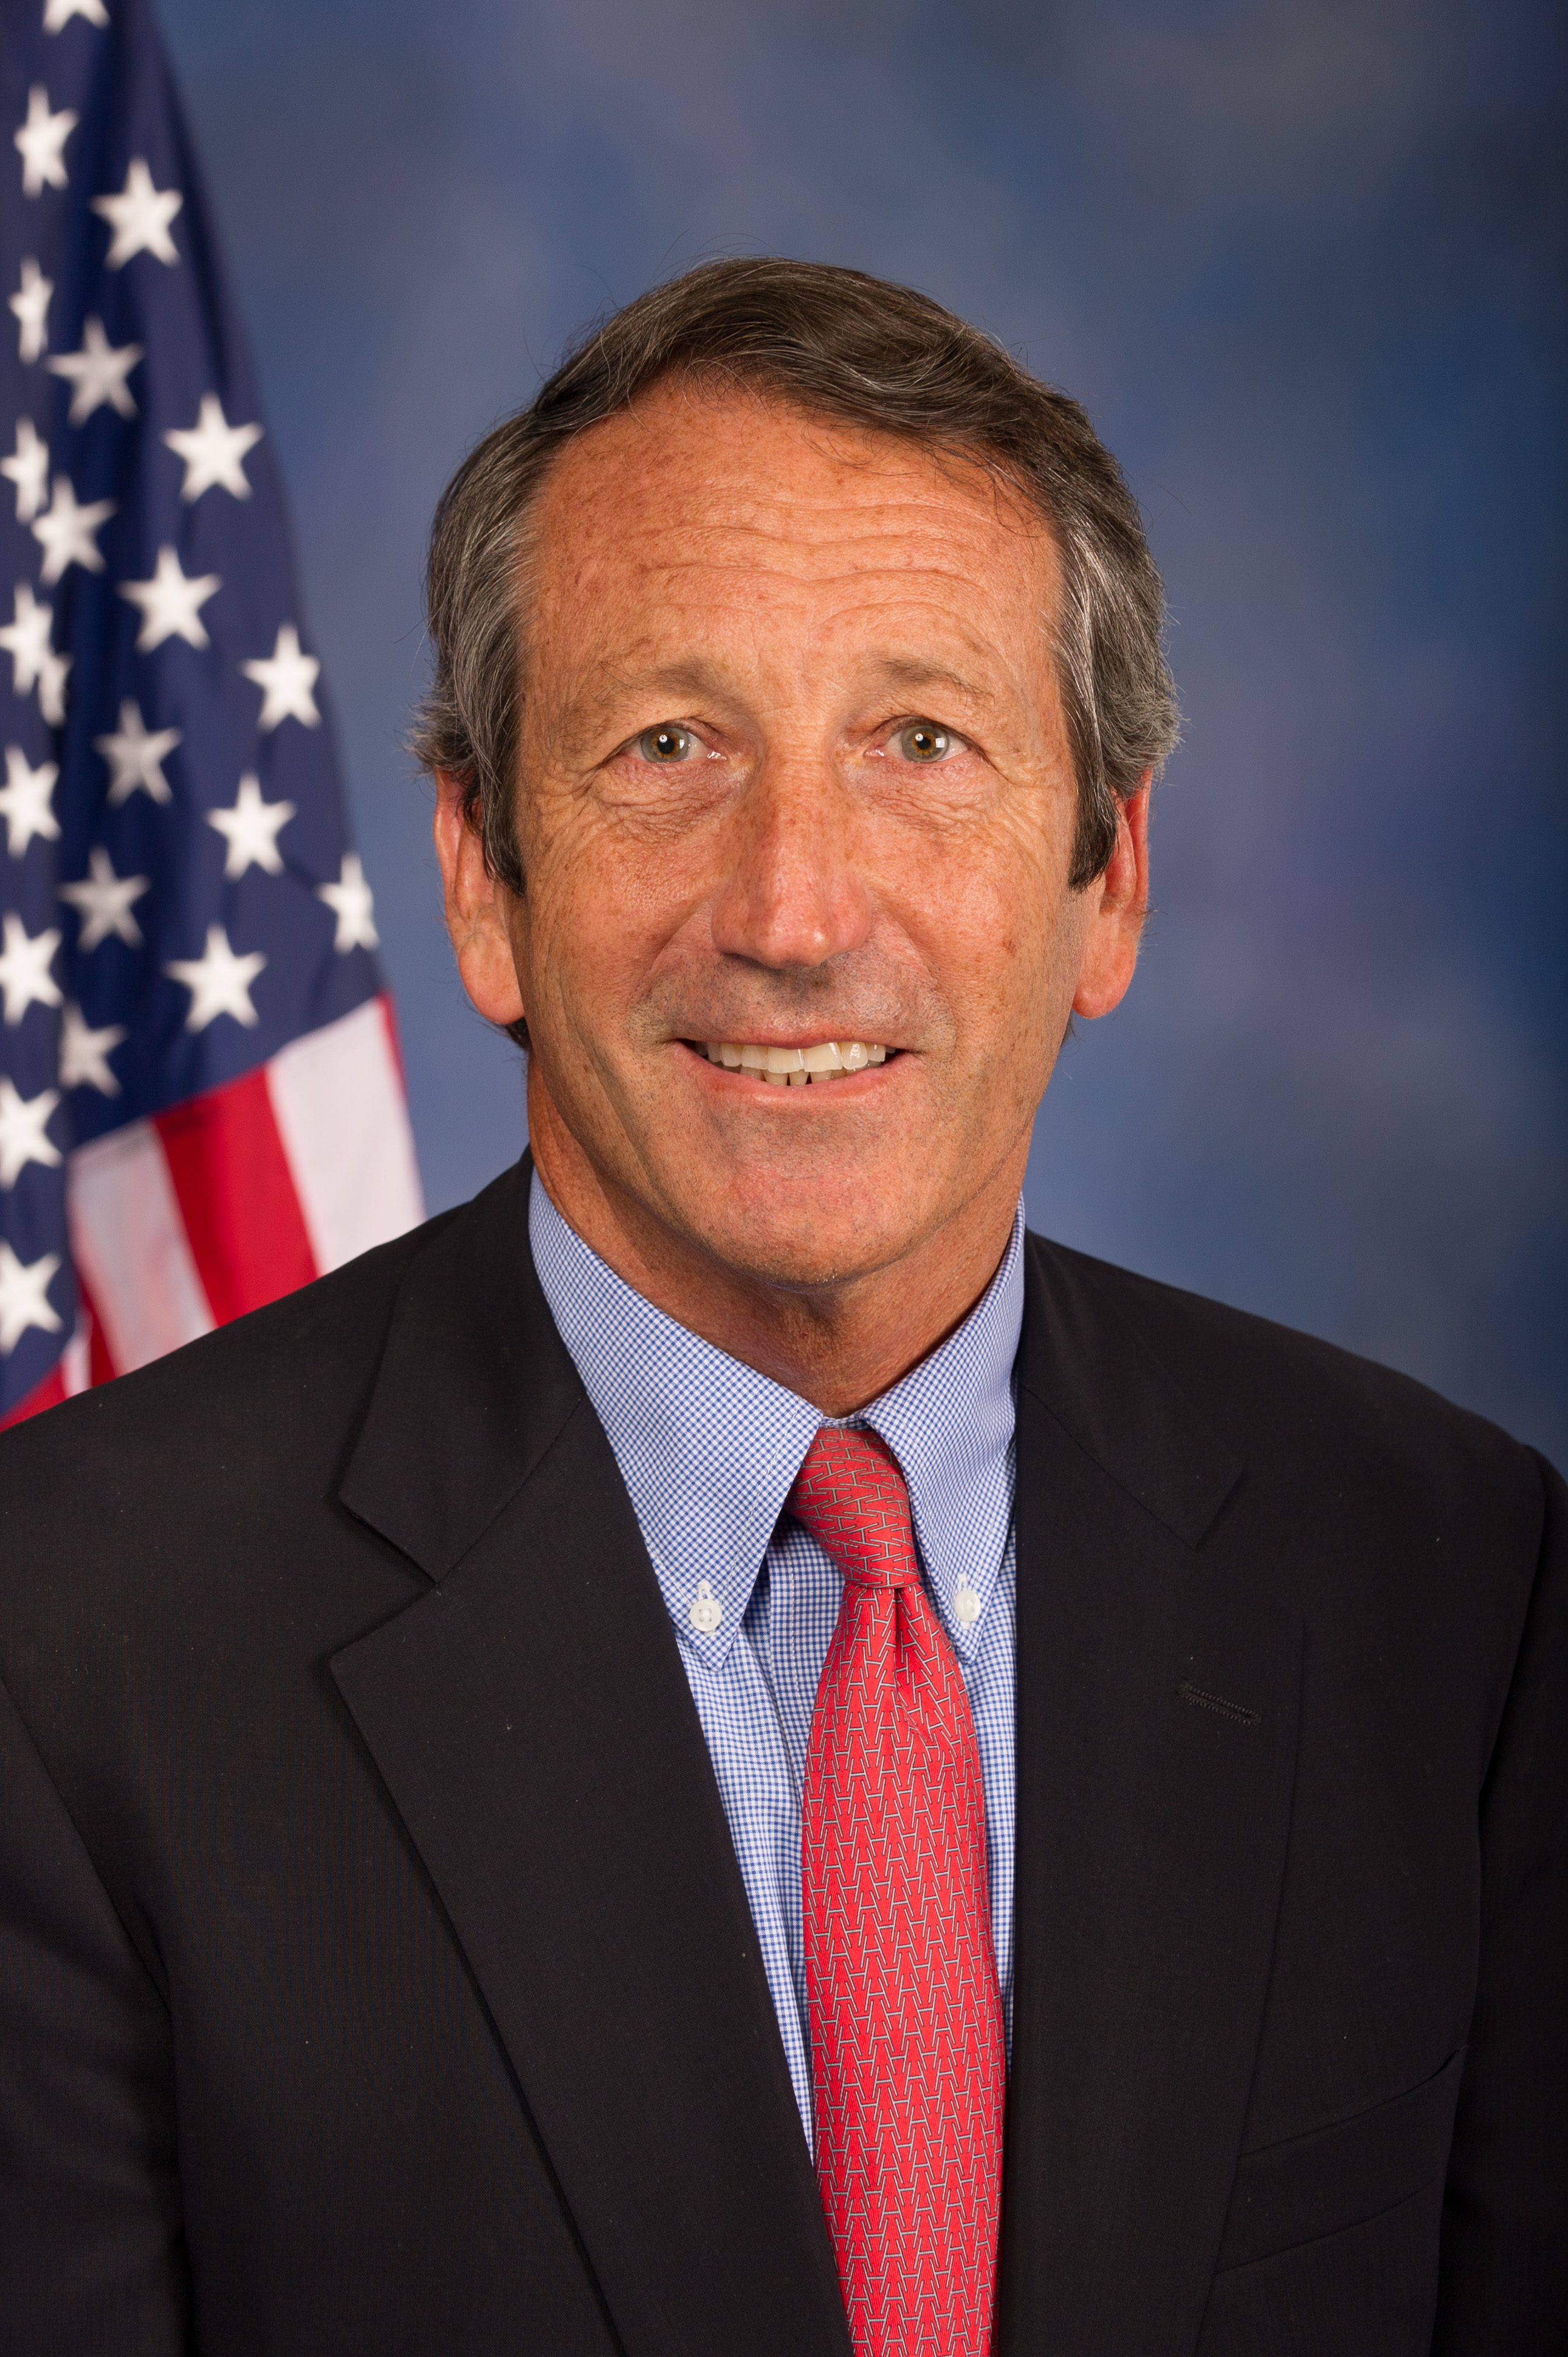 Sanford replaces CEO after controversial email about masks